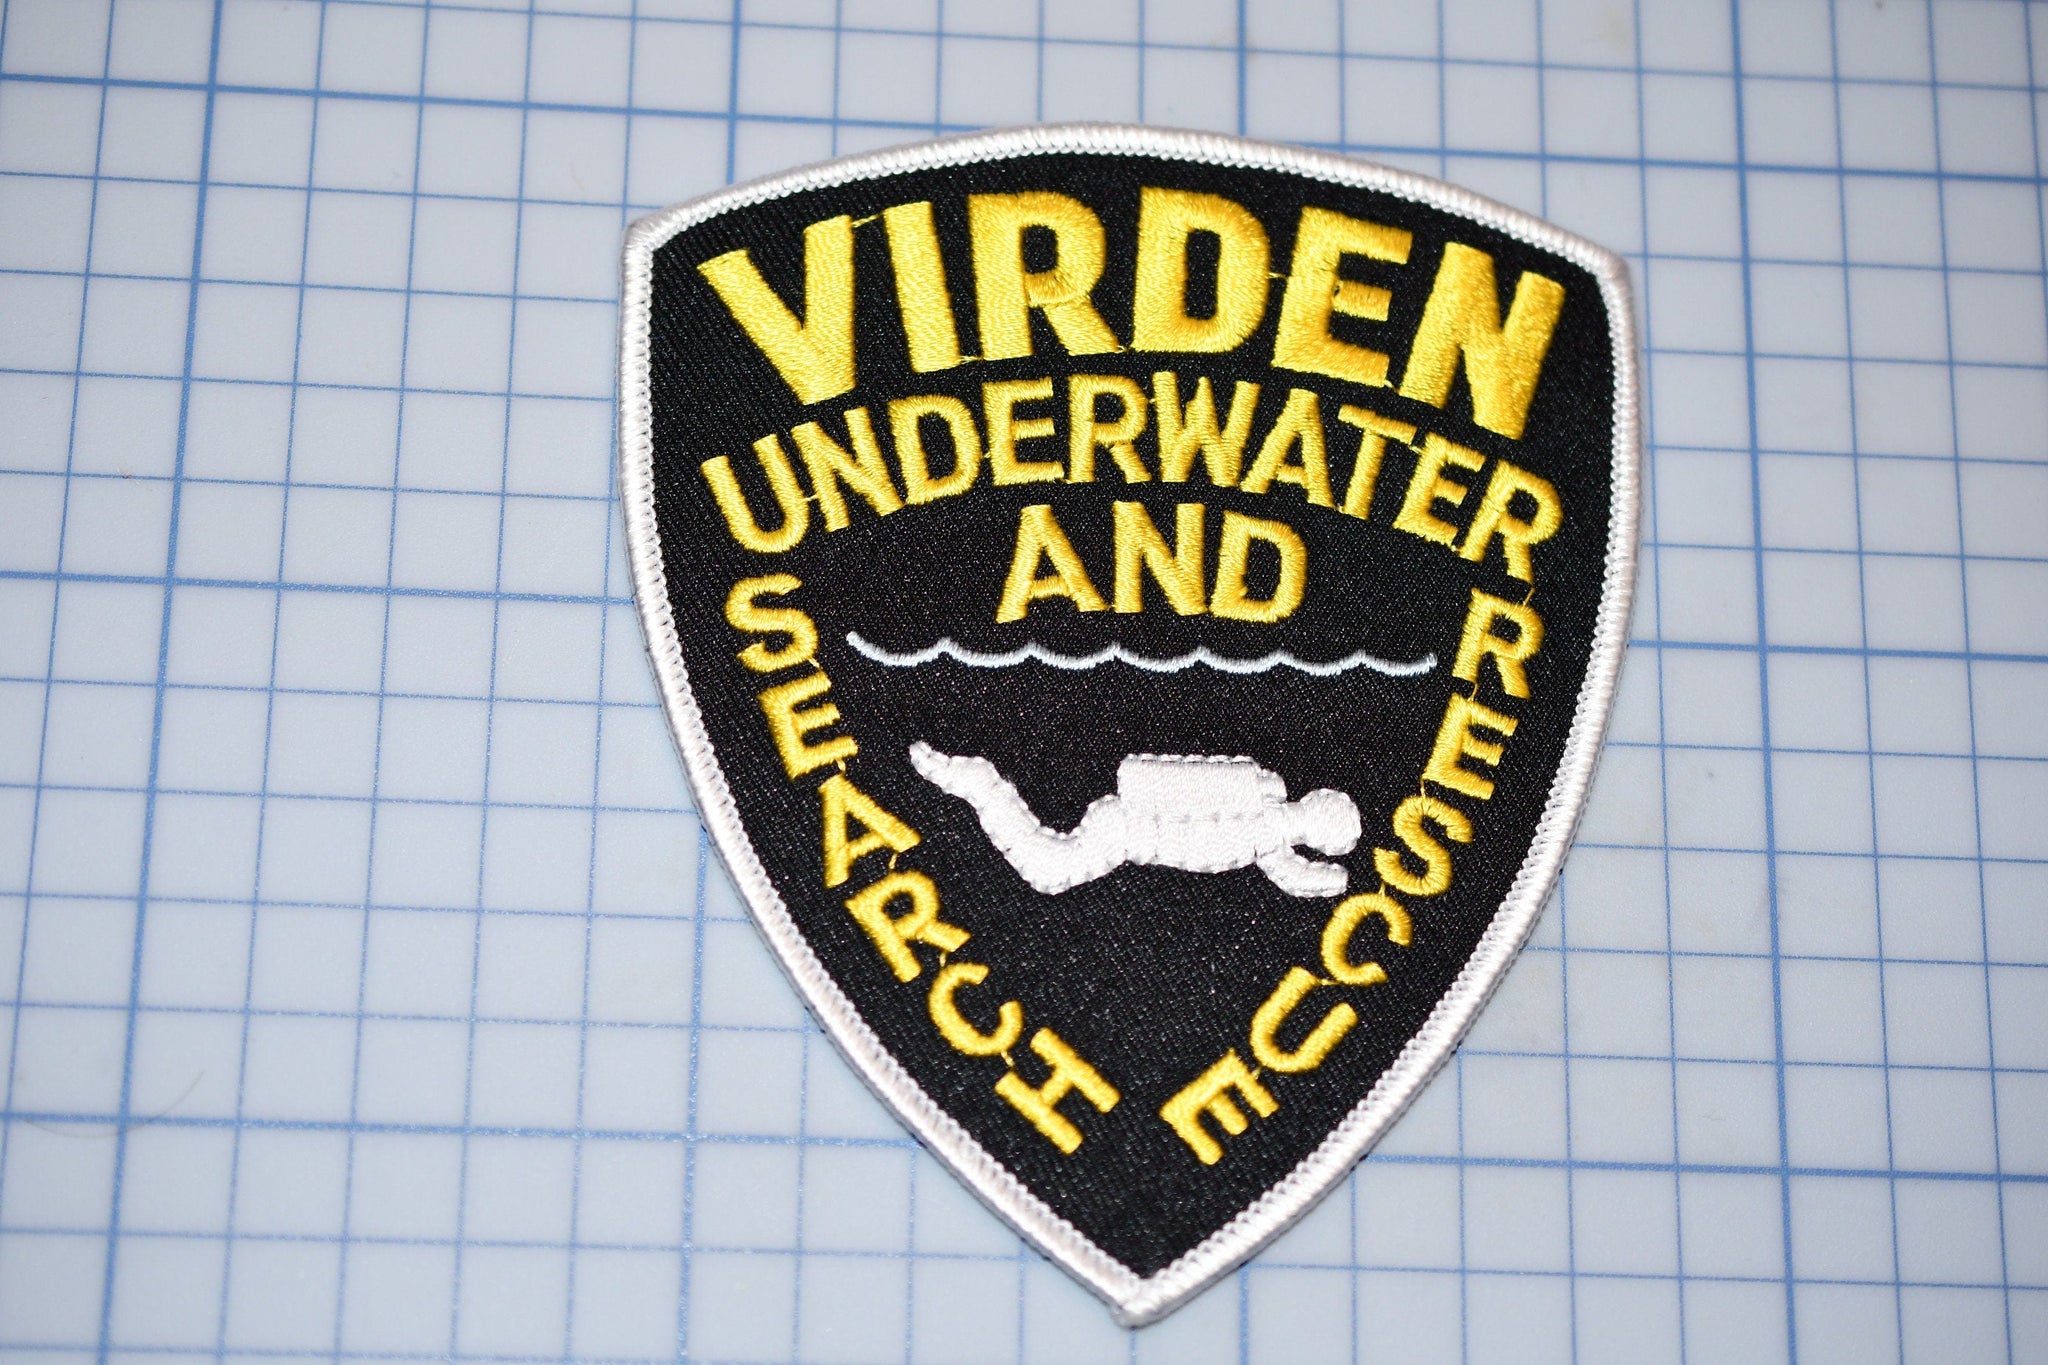 Virden Illinois Underwater Search And Rescue Patch (B23-324)